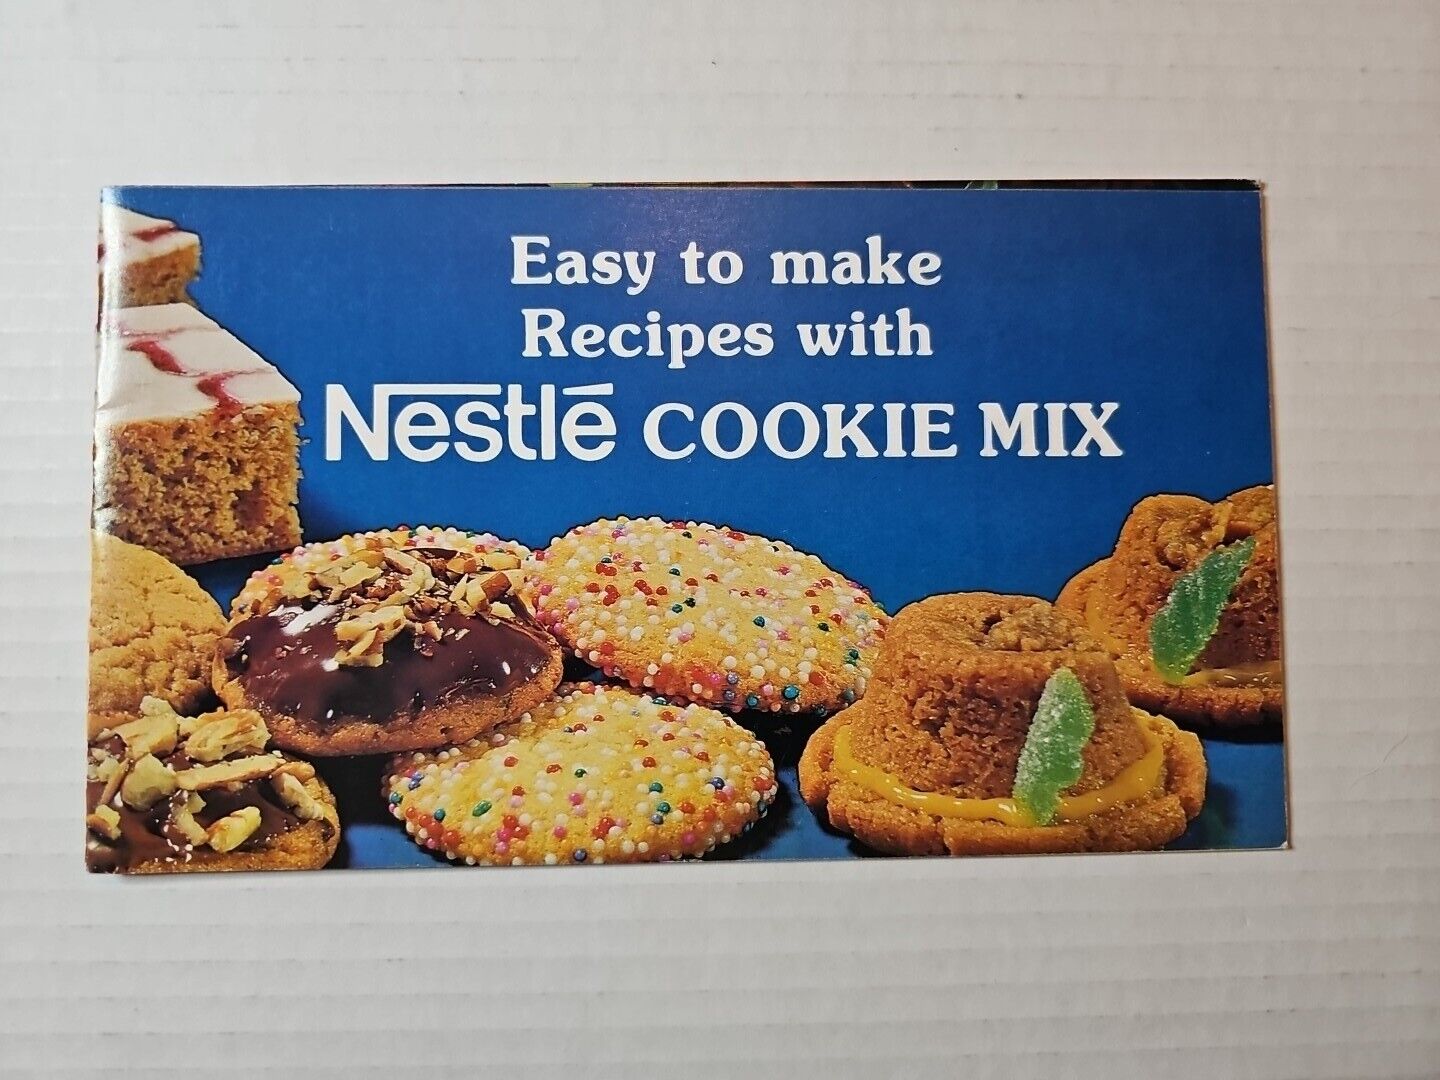 Vintage 1970s Nestle Cookie Mix Easy to Make Recipes Delicious Home Baked Cookie